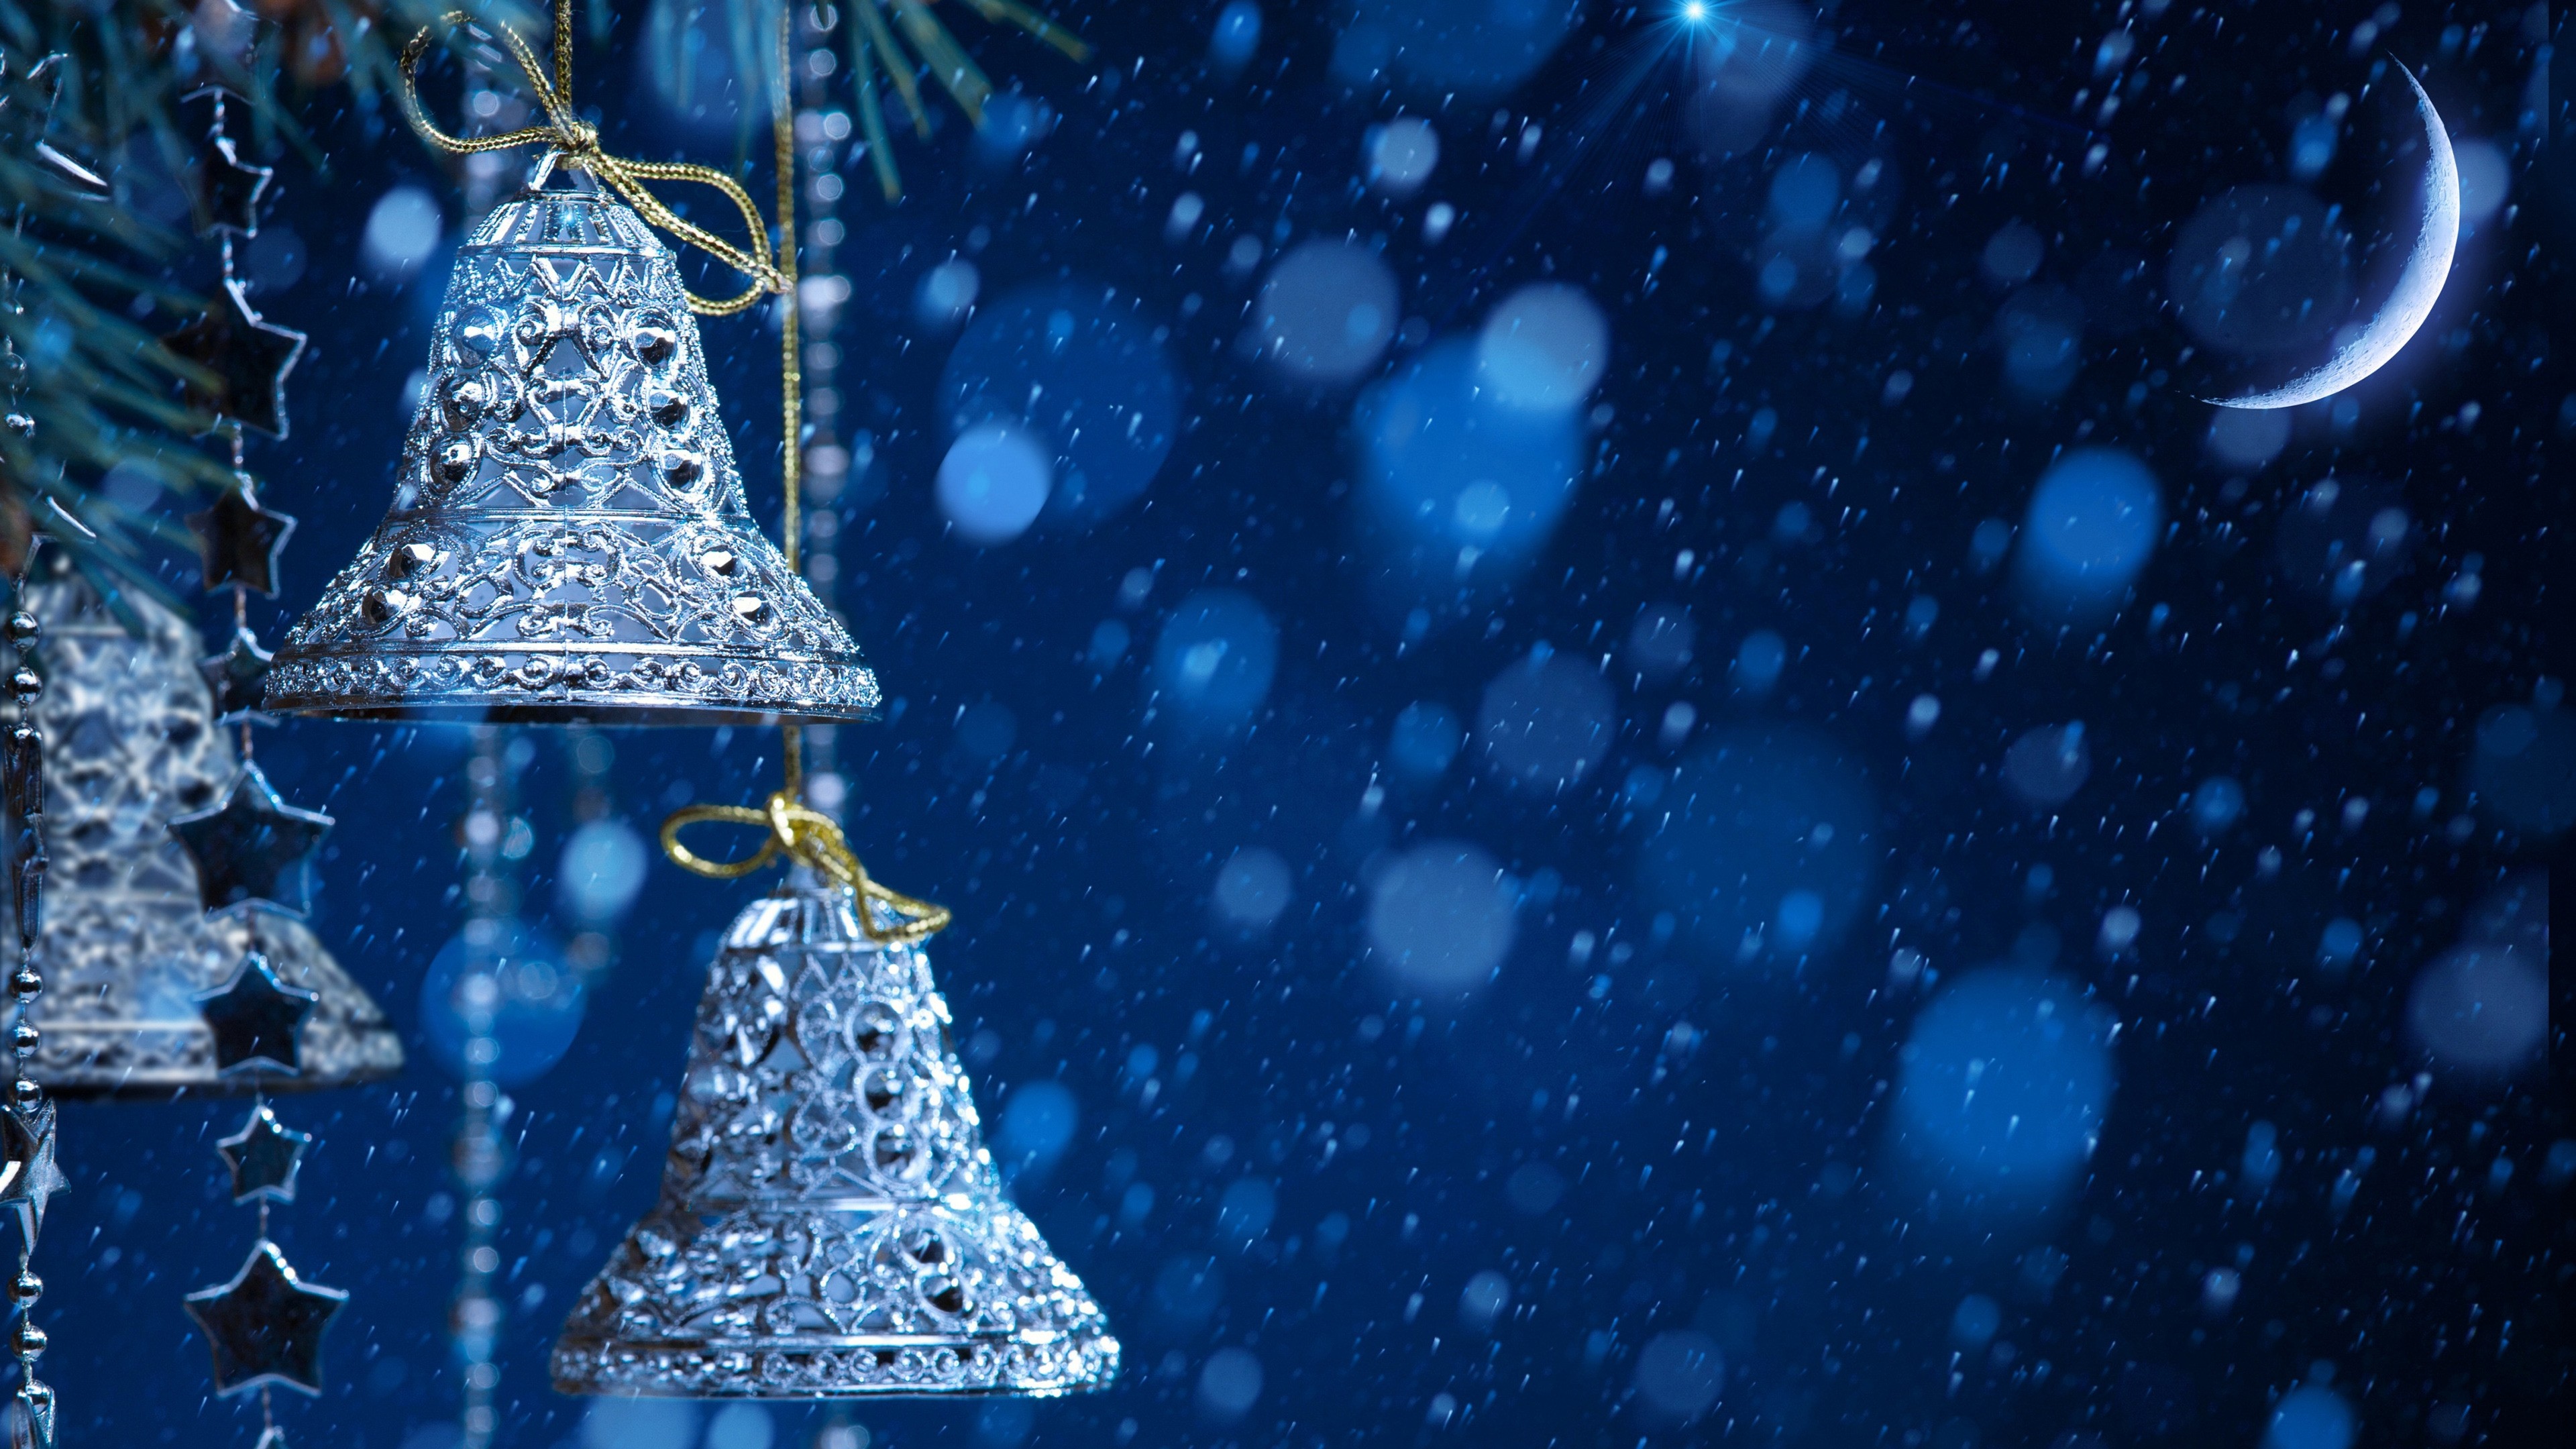 3840x2160 Blue And Silver Christmas Backgrounds – Happy Holidays!